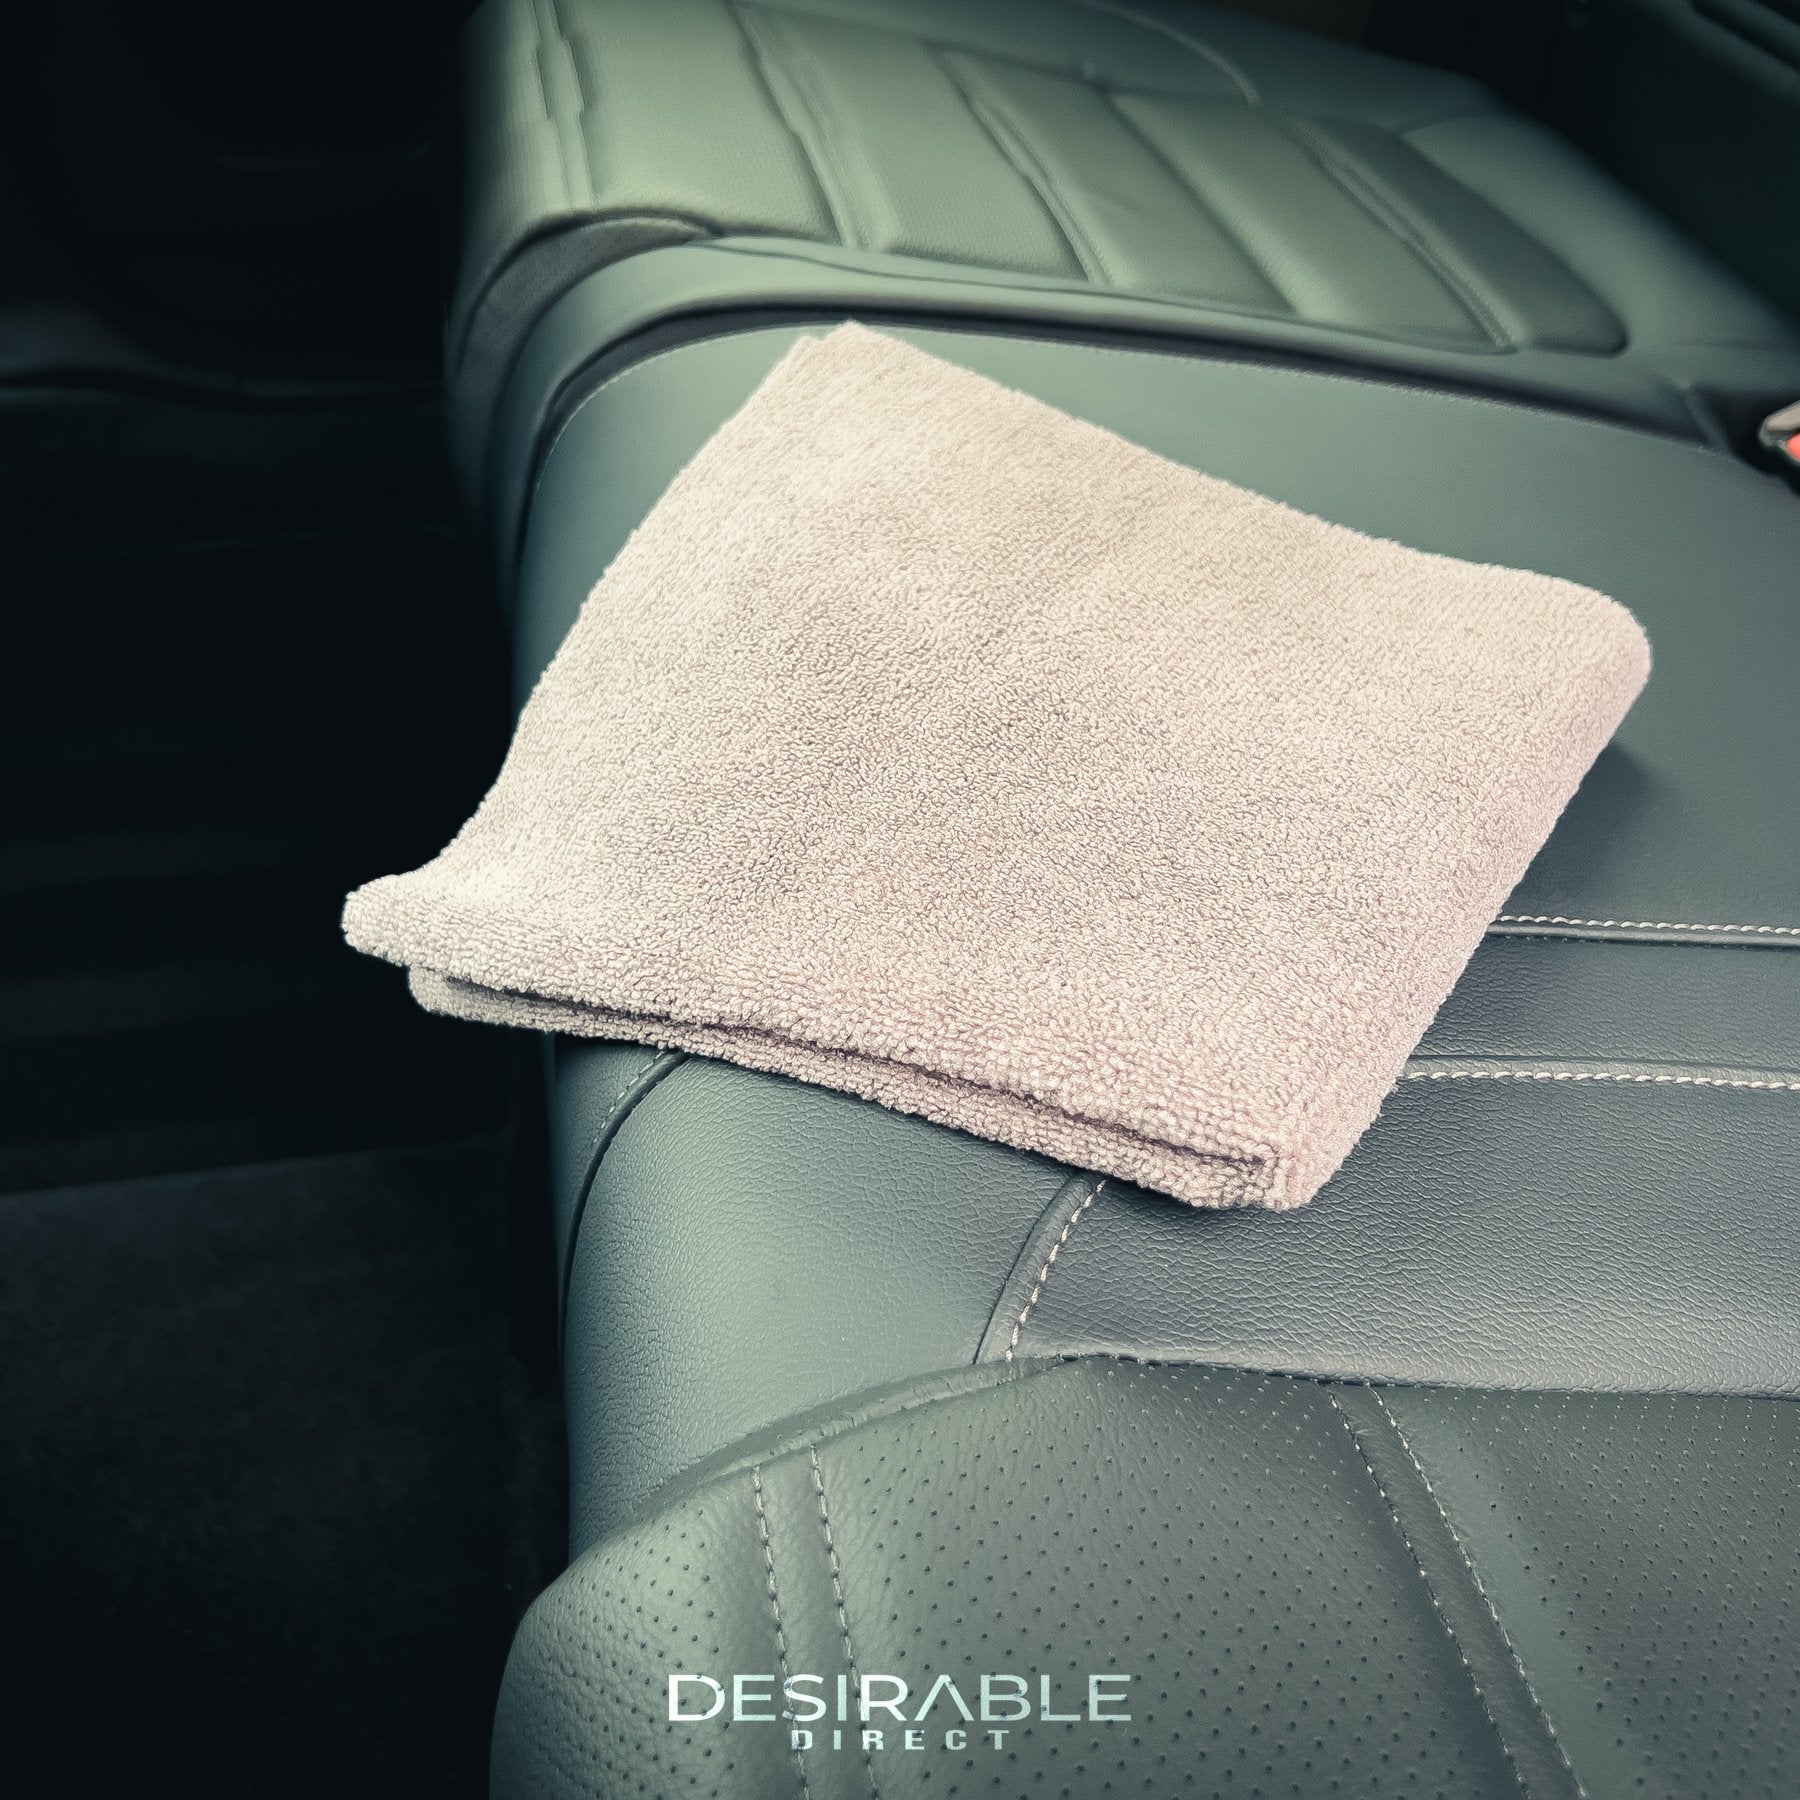 Car care microfibre grey cloth on the rear passenger leather seats in a car.